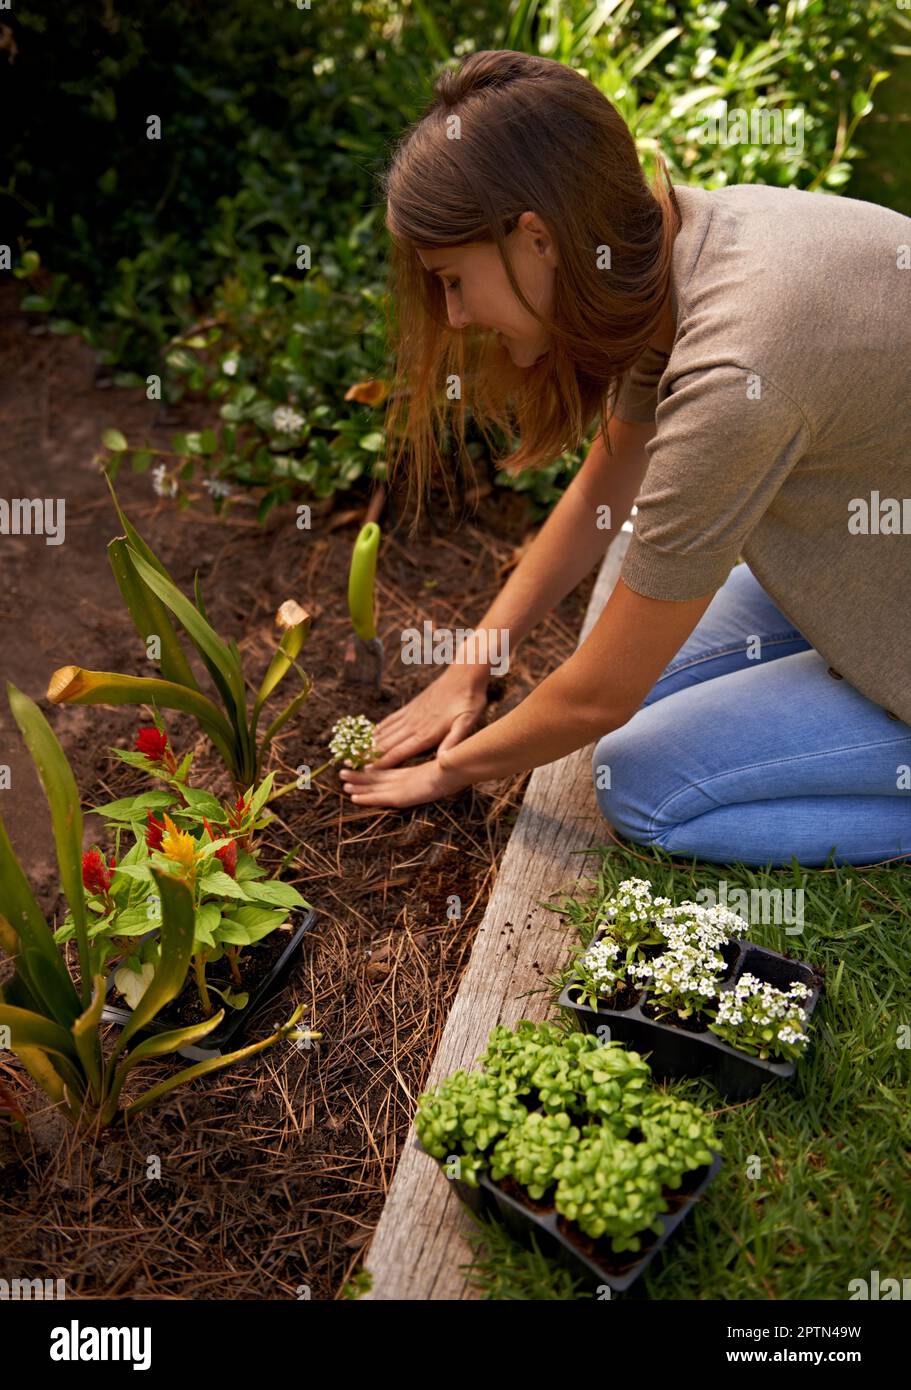 Staying in touch with her inner gardner. A young woman gardening Stock Photo